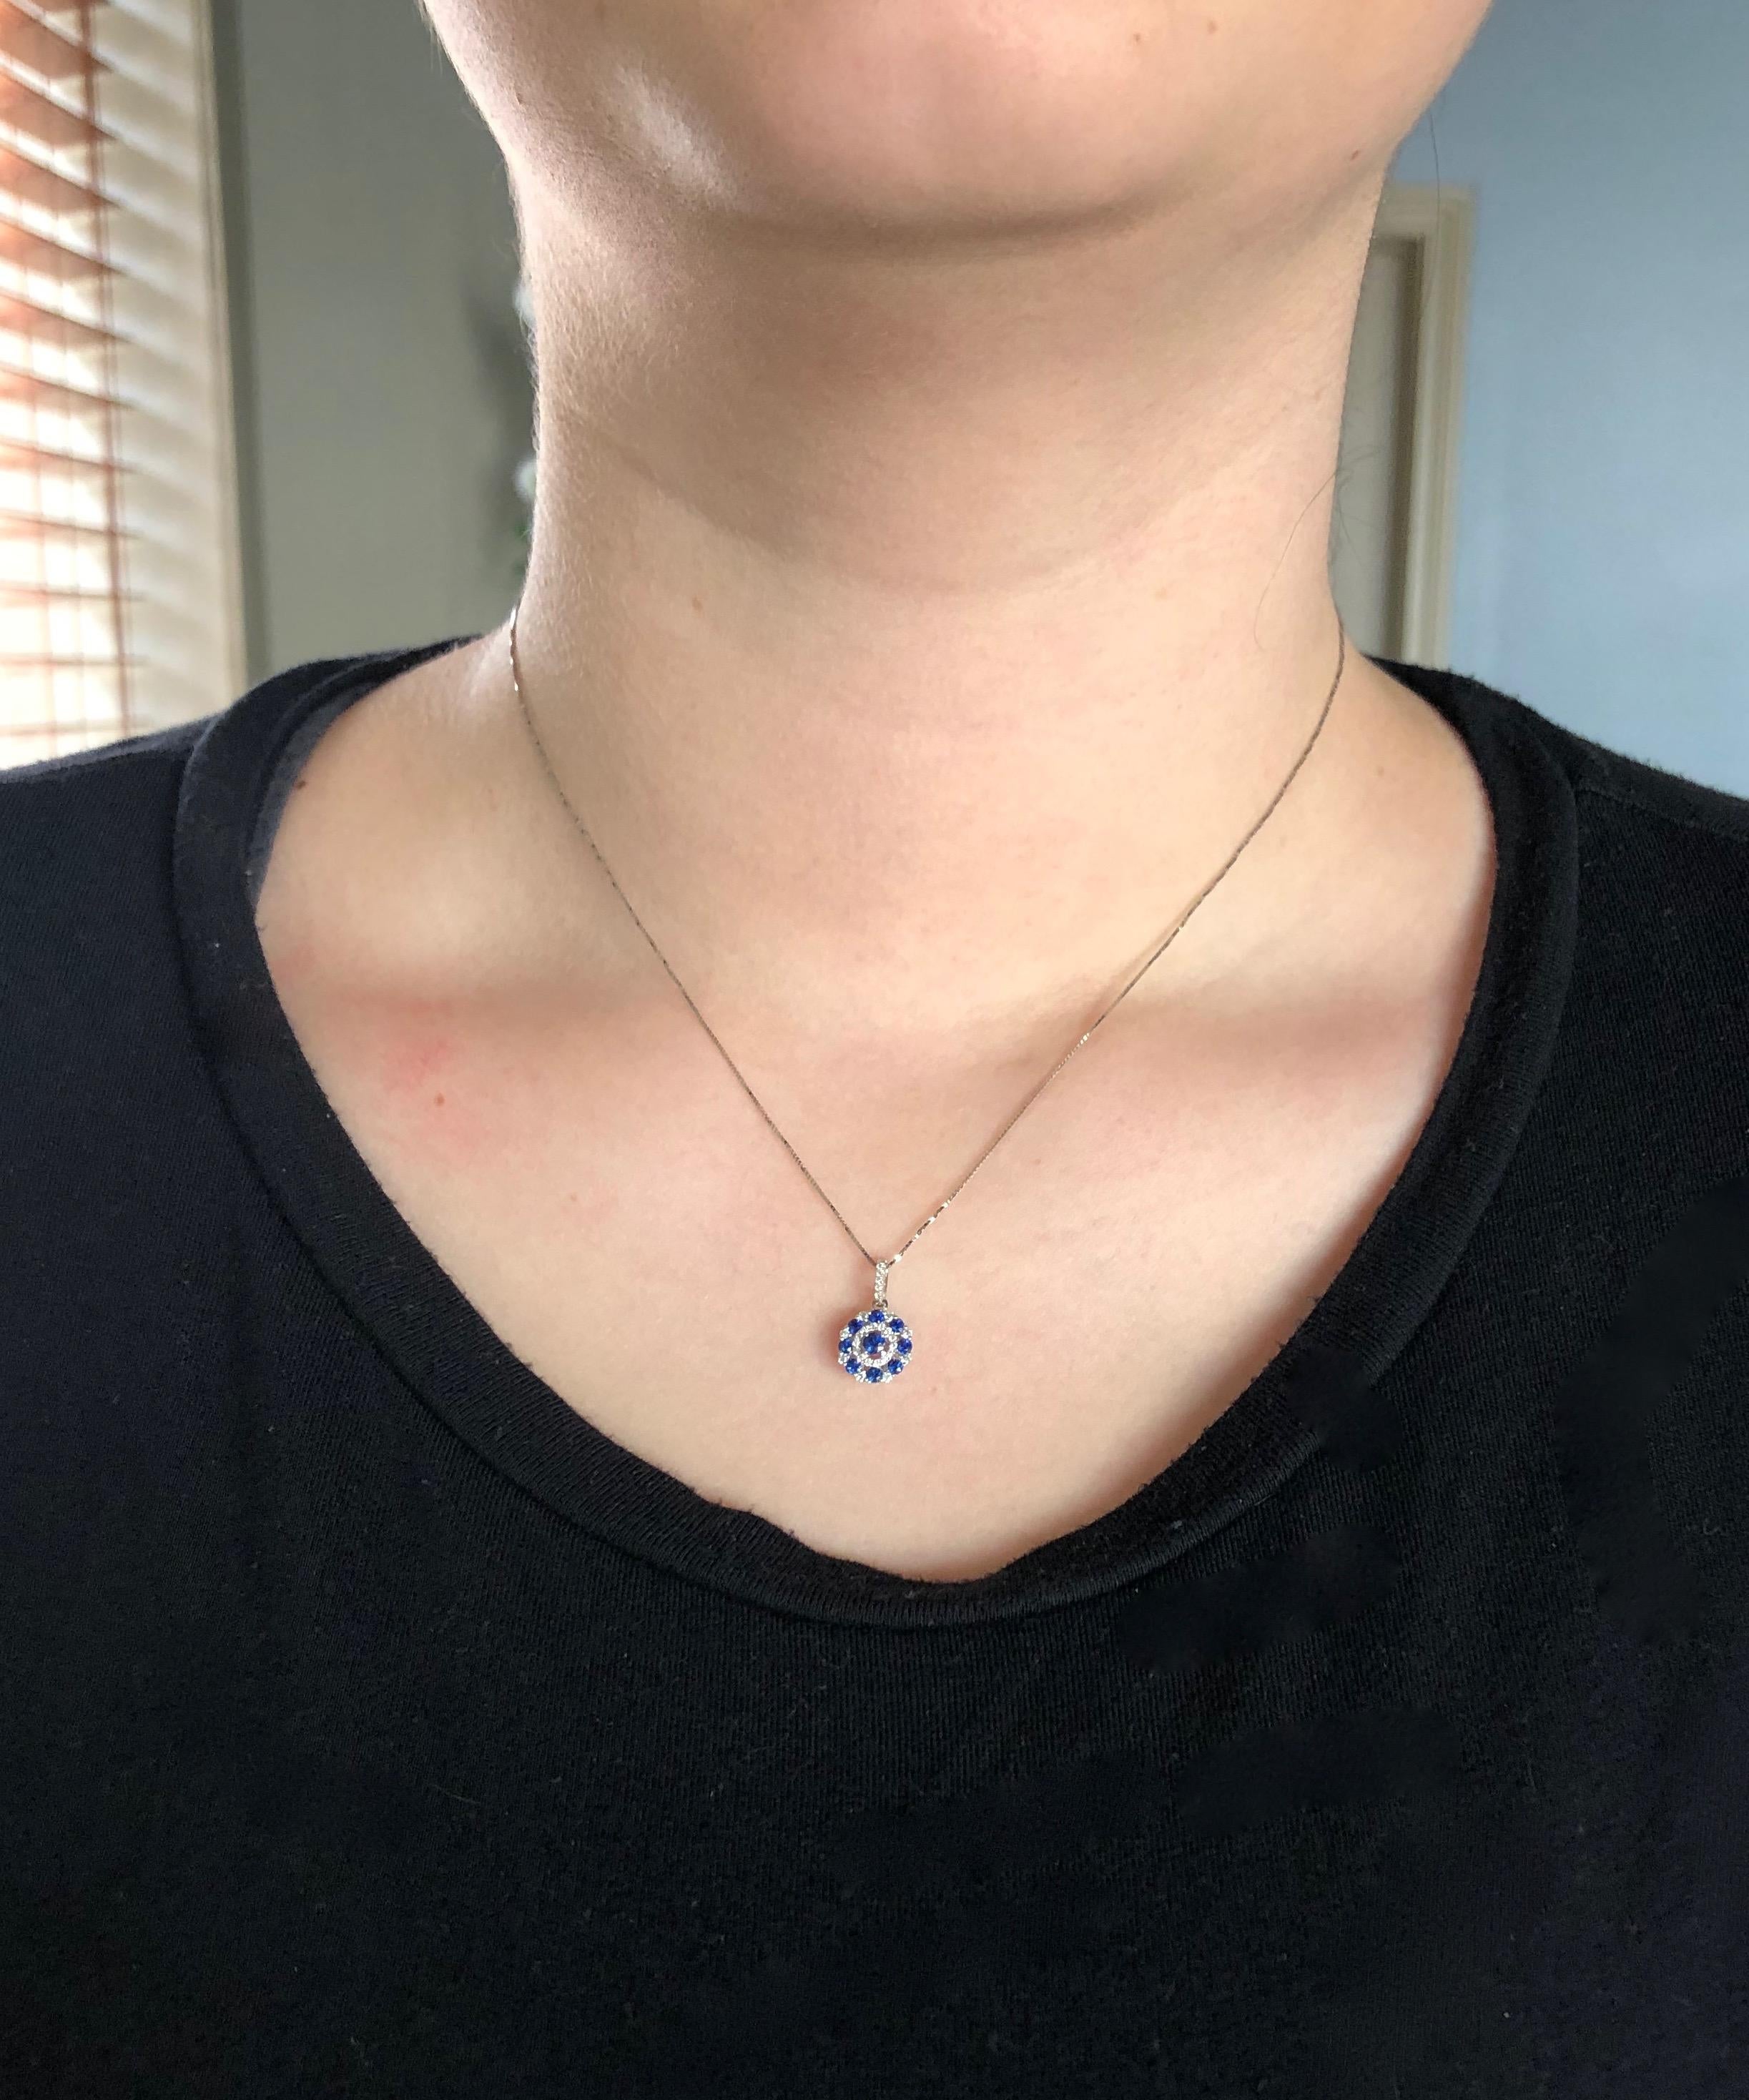 This beautiful necklace features a unique halo style pendant consisting of 28 Round Brilliant Cut Diamonds and 9 Round Cut Sapphires. 

Gemstone: Sapphire & Diamond
Gemstone Carat Weight: .40CTW of Round Cut Sapphire 
Diamond Cut: 28 Round Brilliant